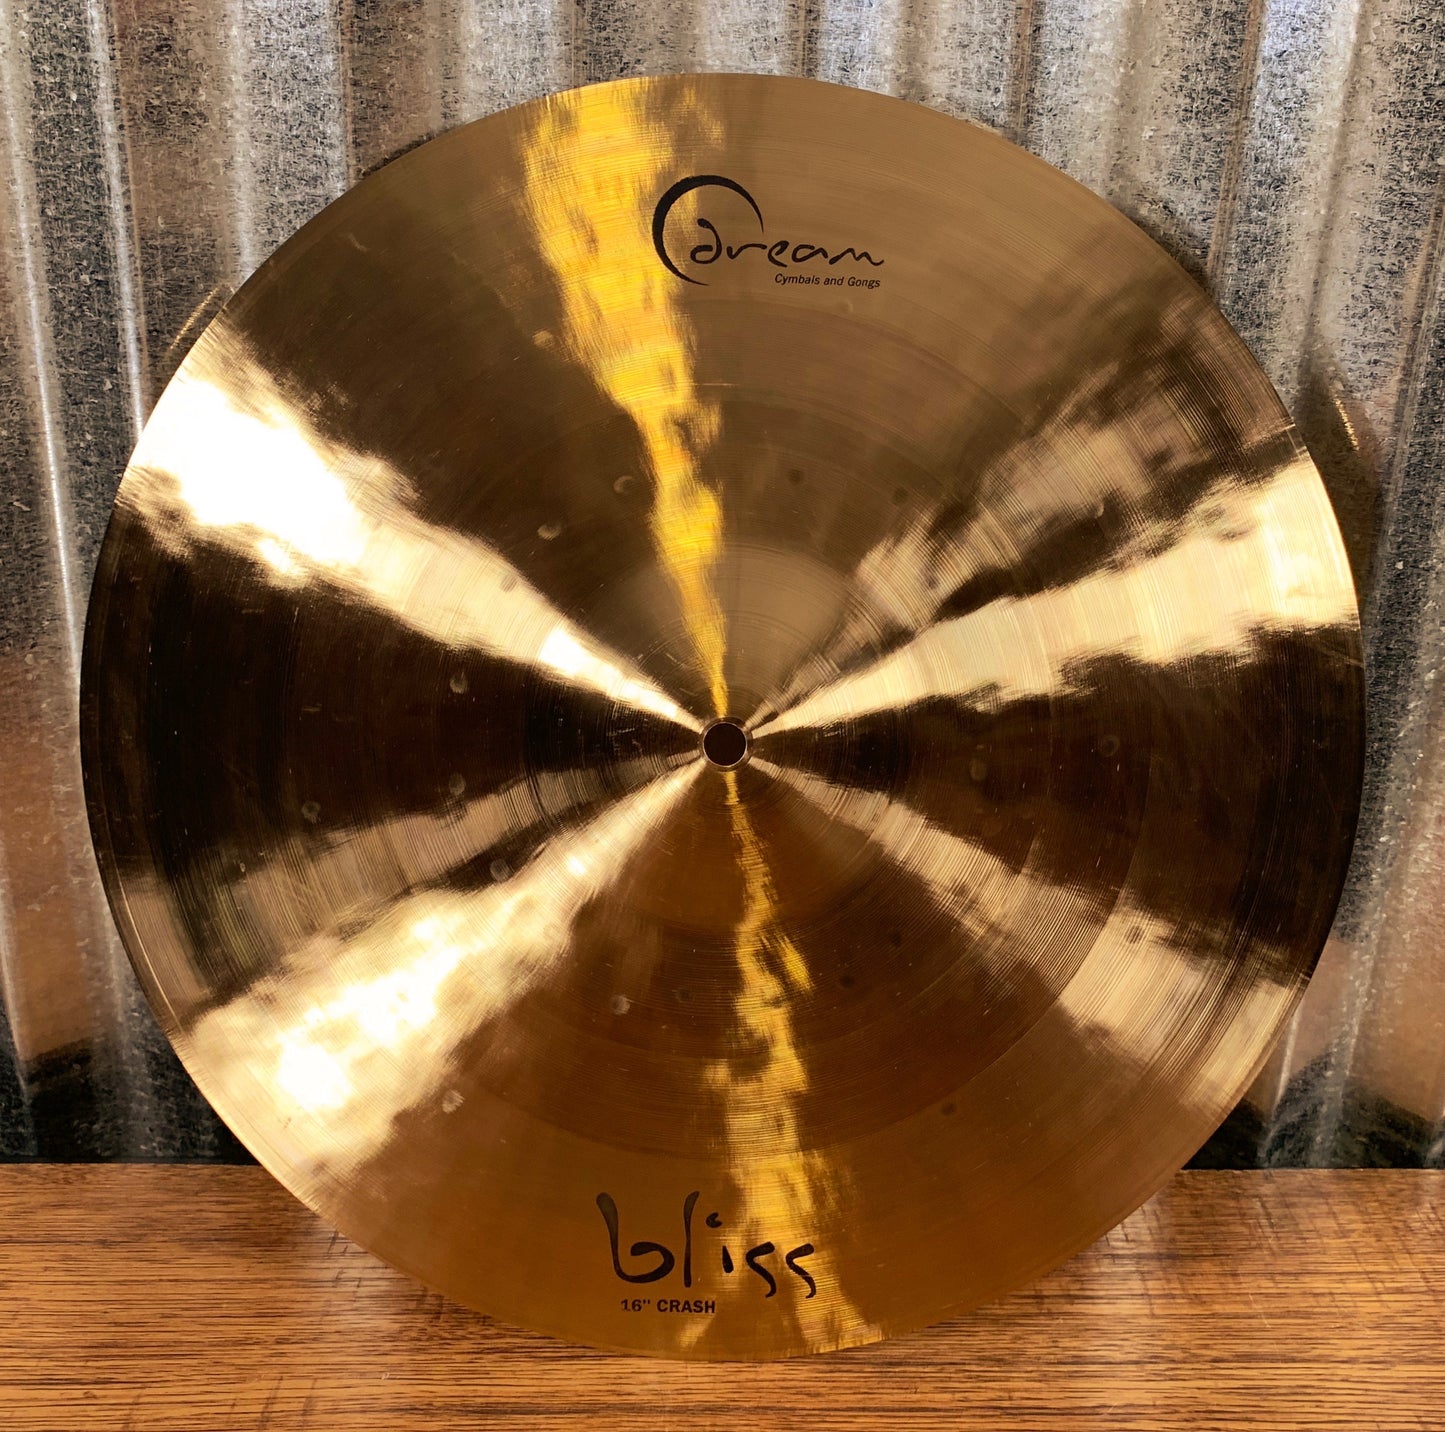 Dream Cymbals BCR16 Bliss Hand Forged and Hammered 16" Crash Demo